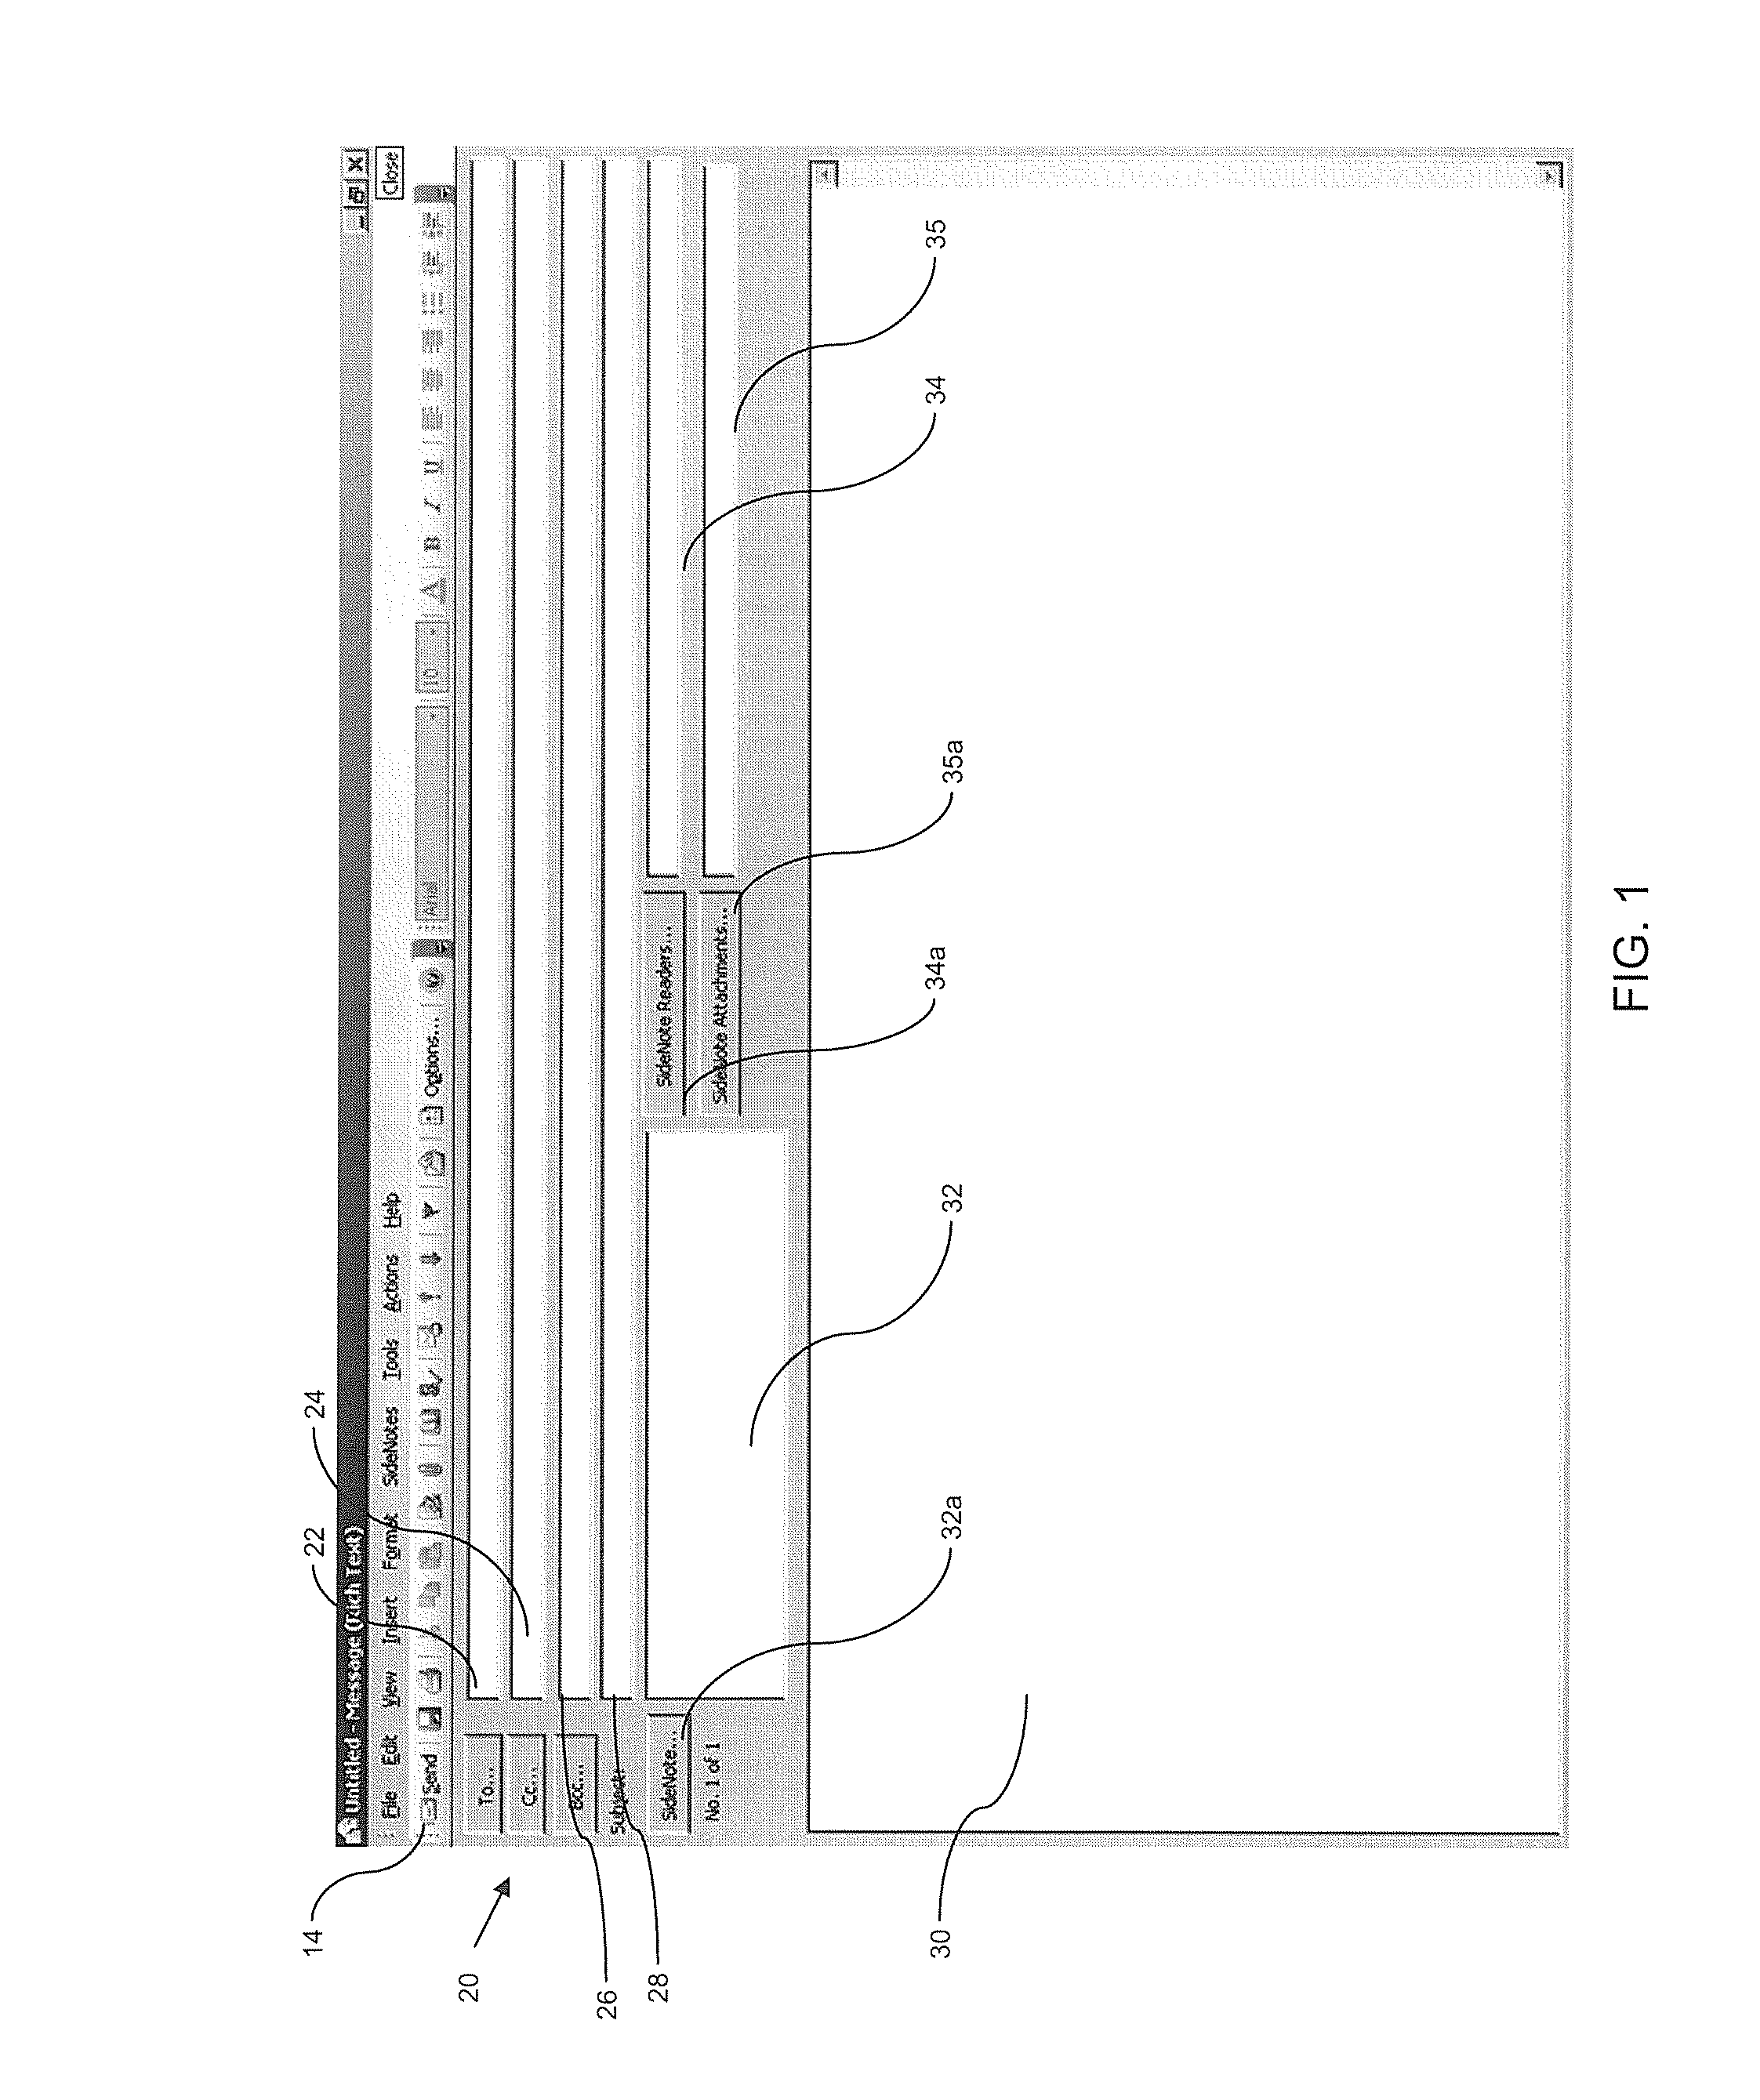 Method and system for processing messages